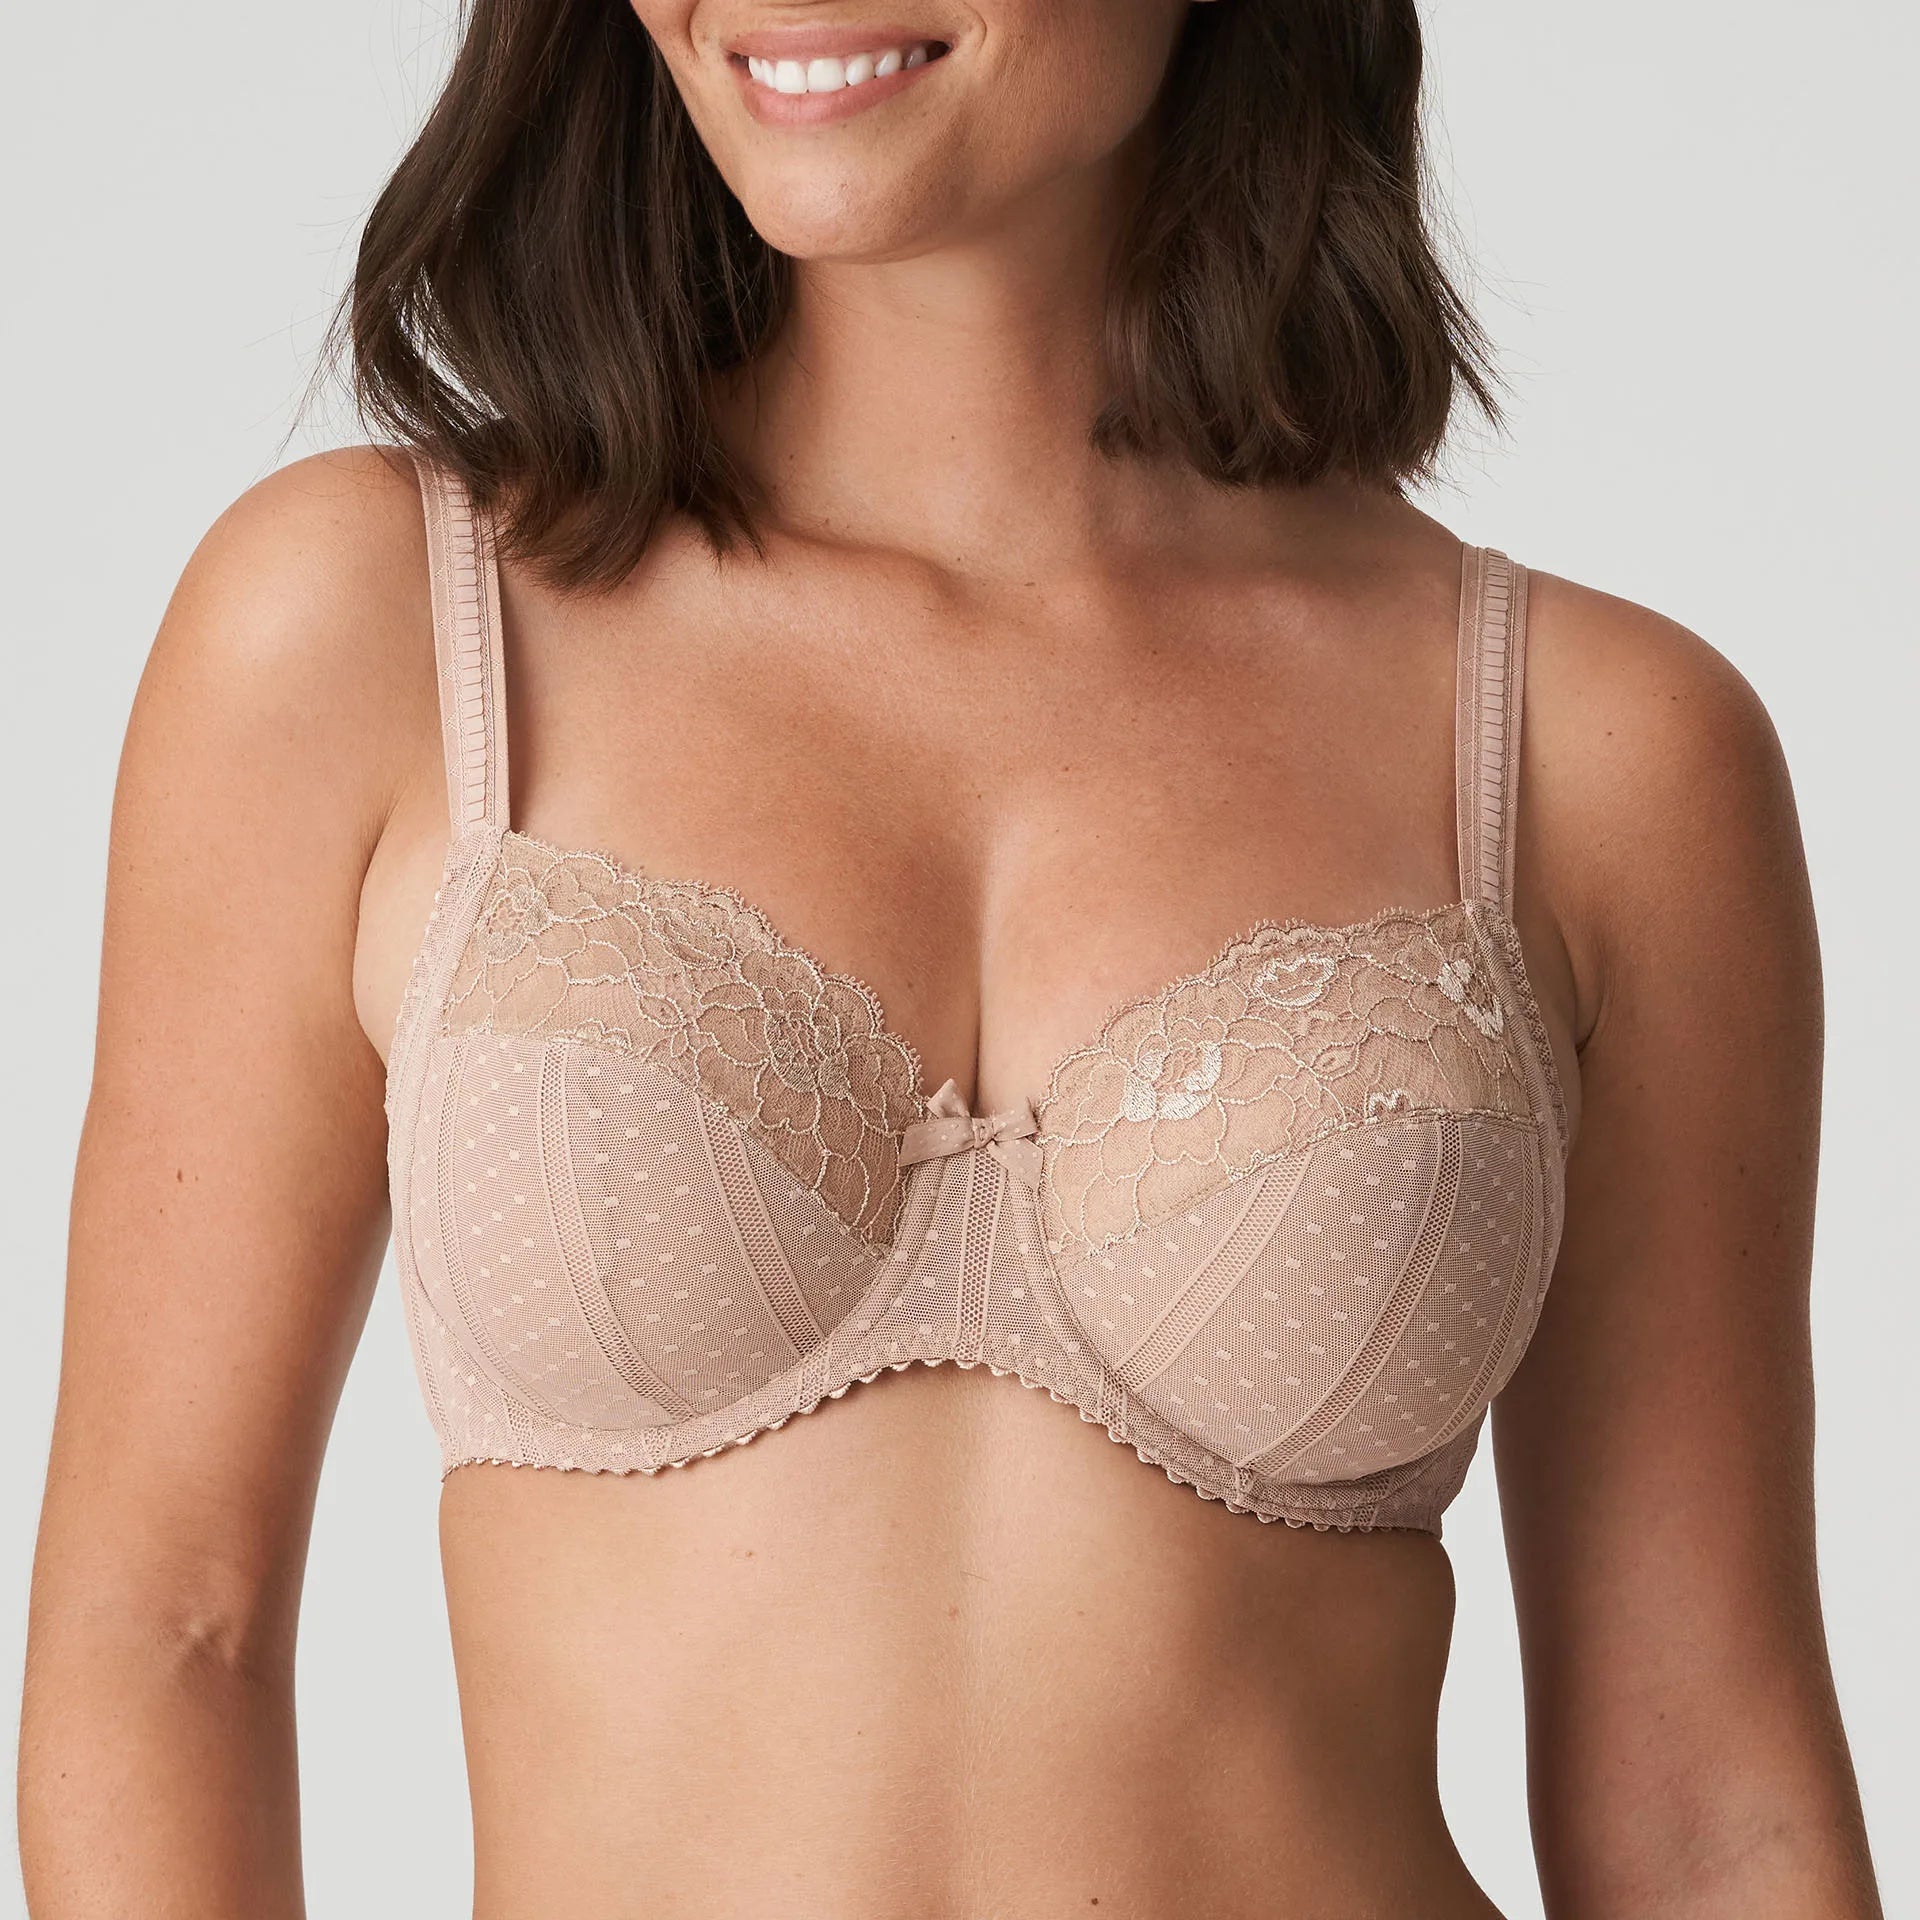 Couture Full Cup Underwire Bra by PrimaDonna